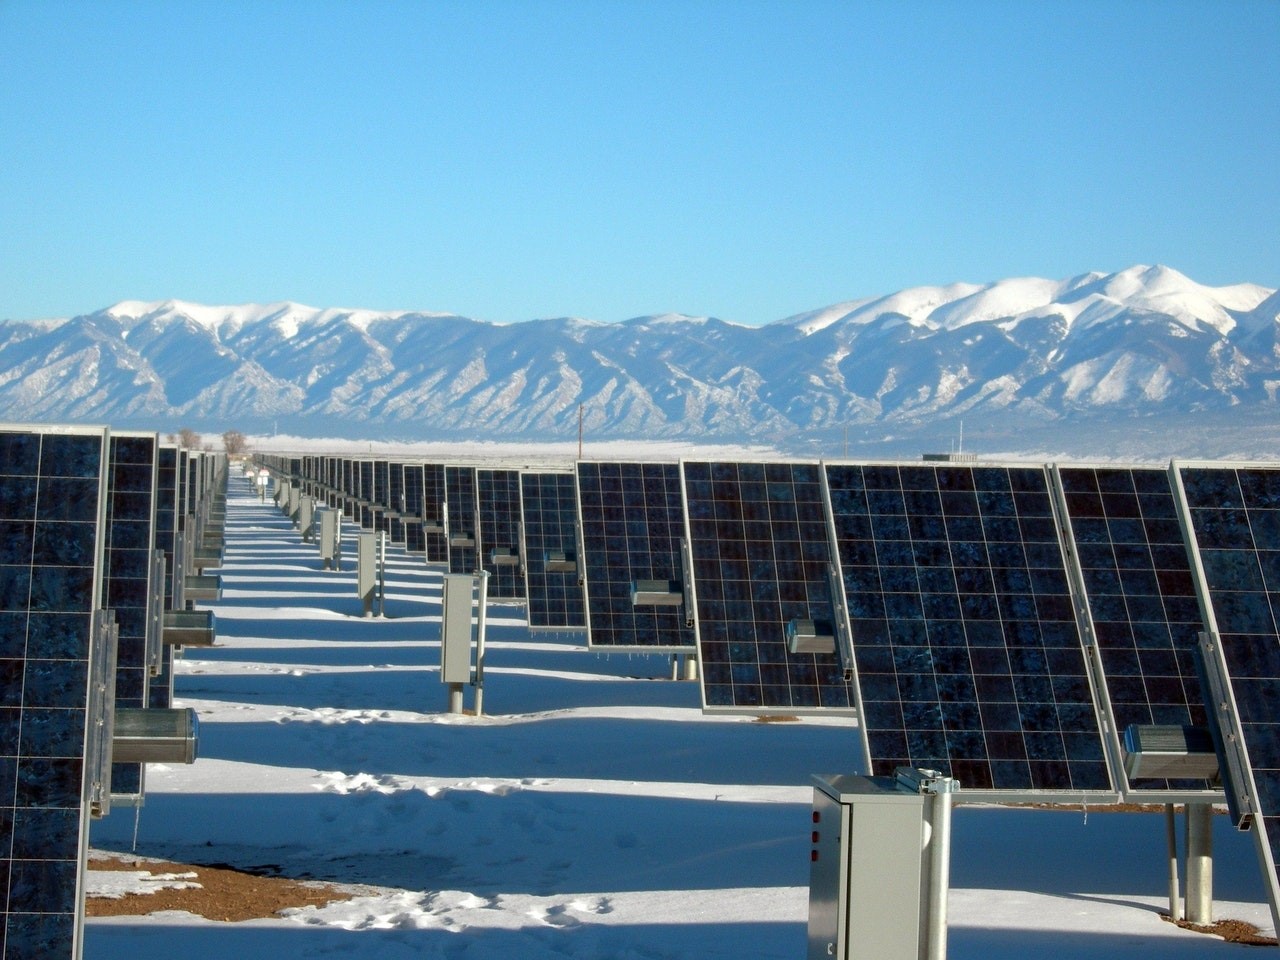 What Are The Pros And Cons Of Solar Energy?